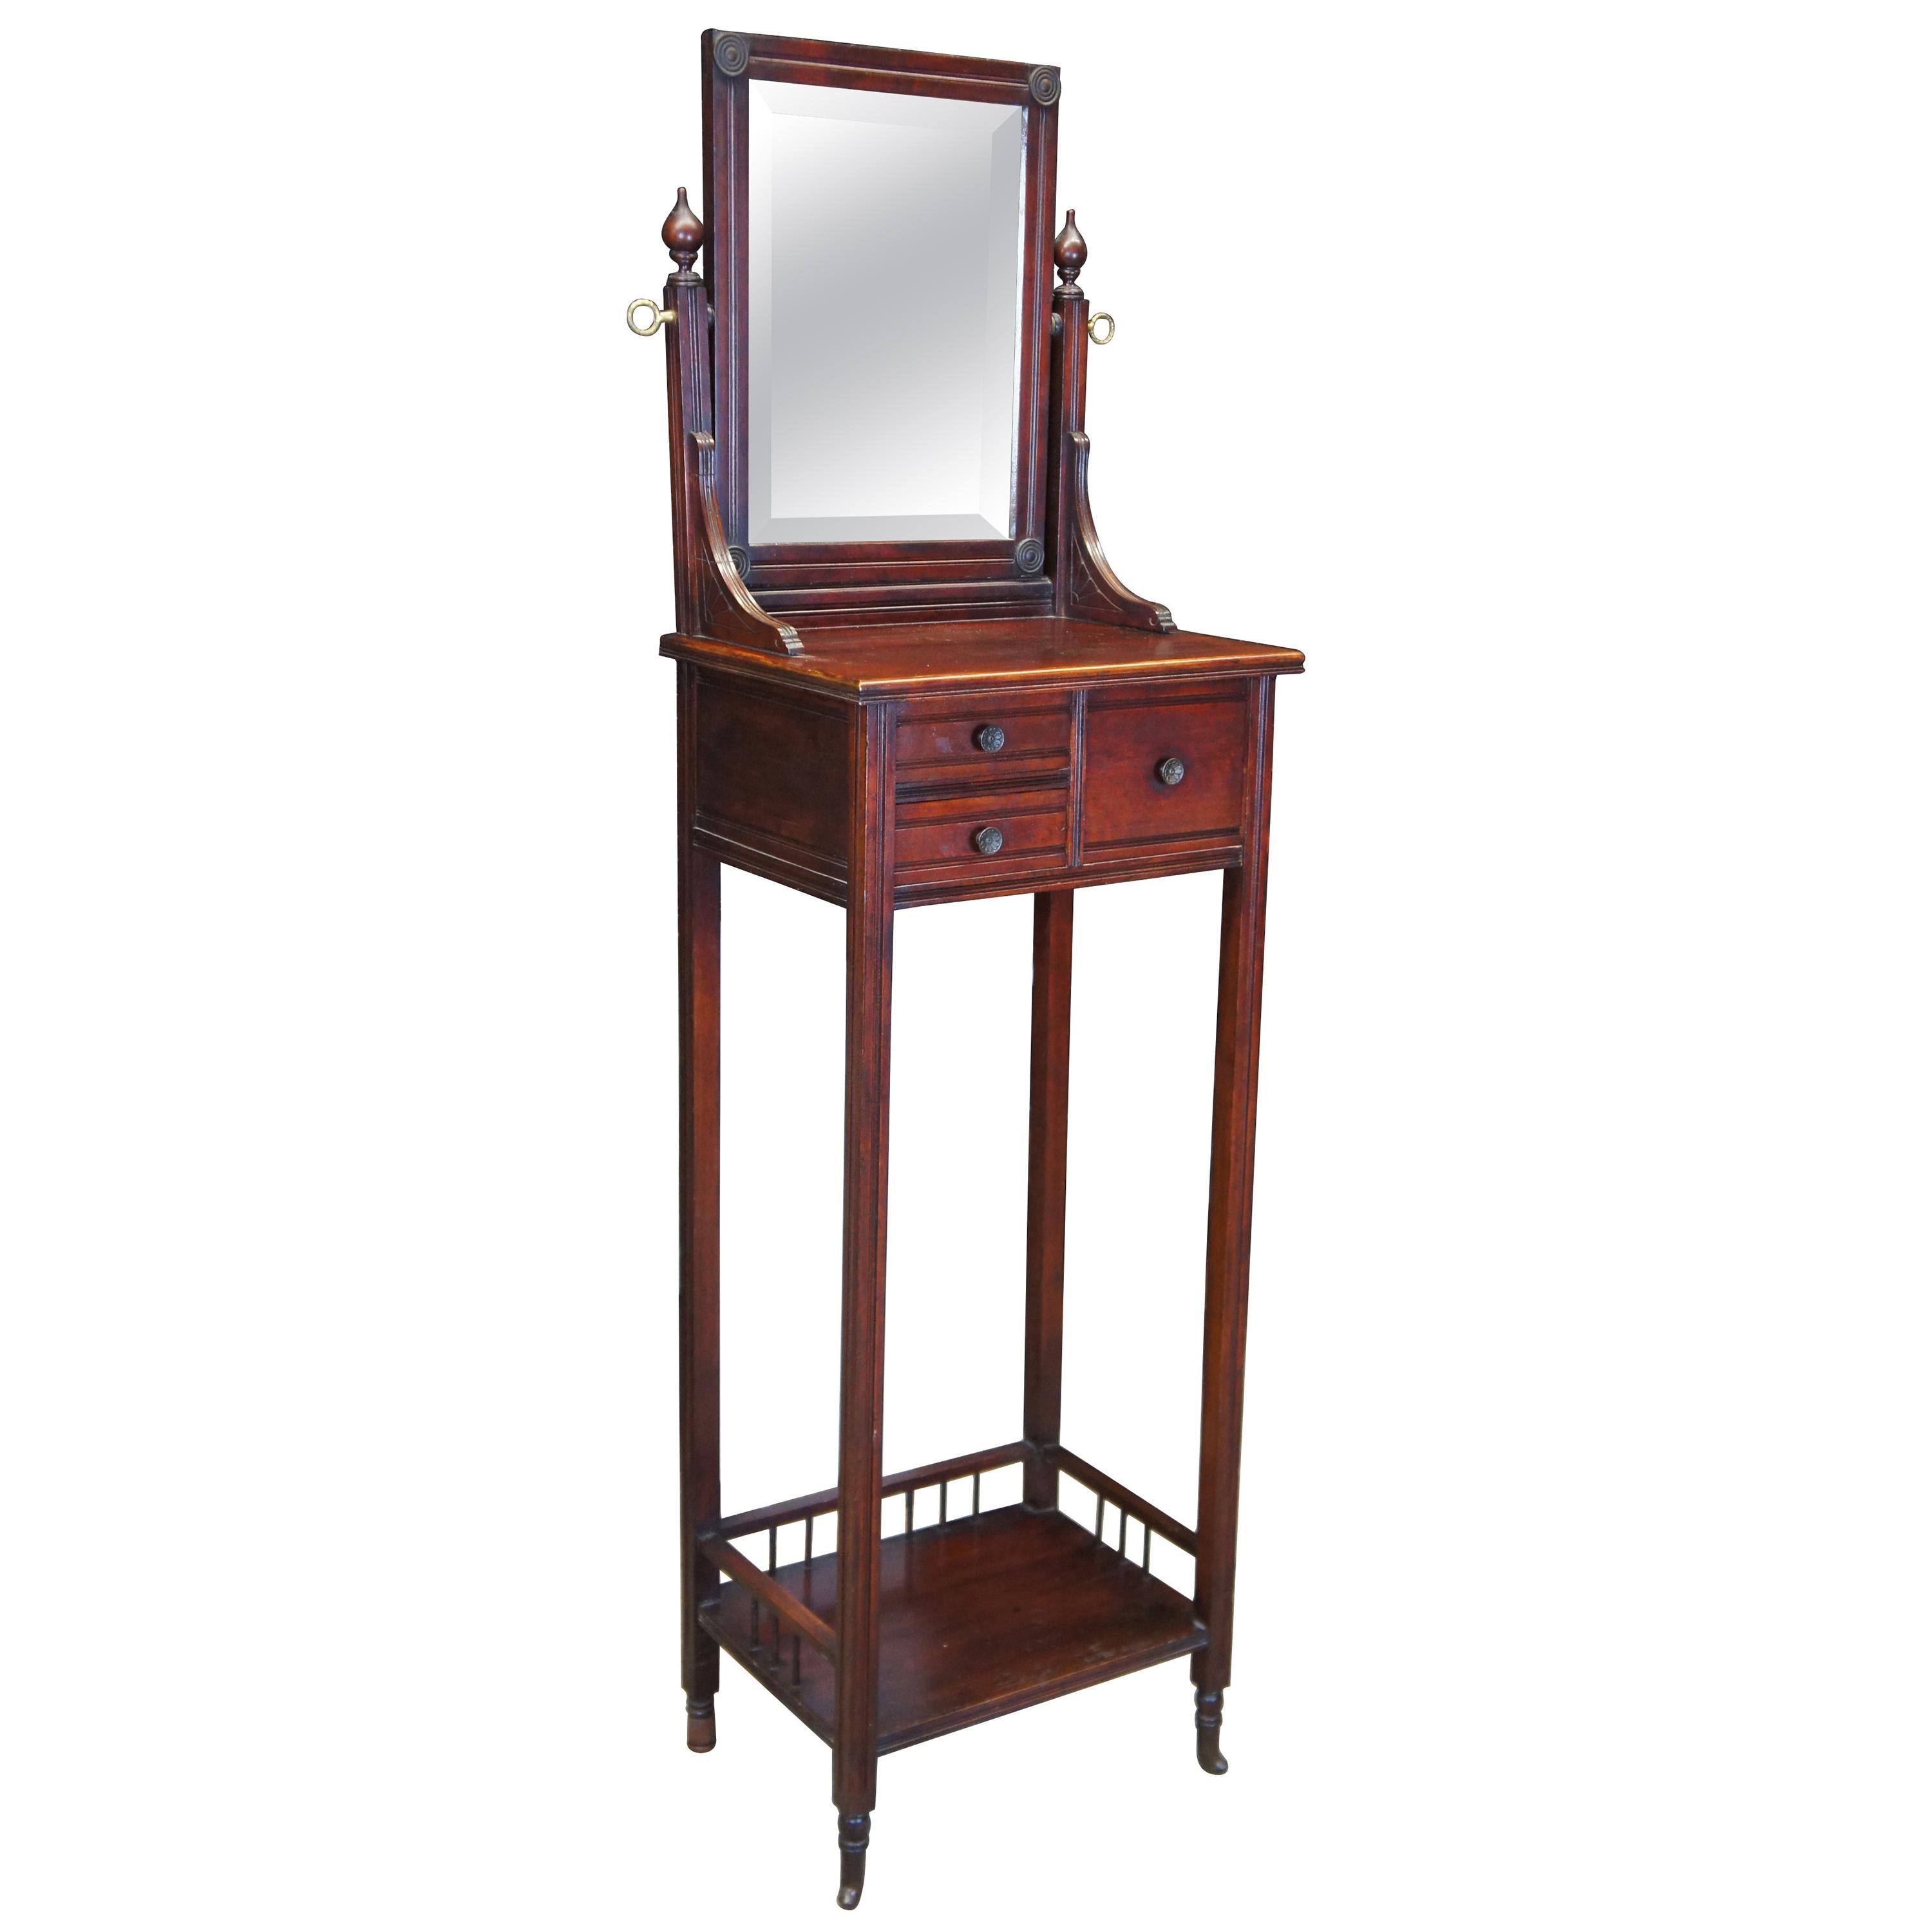 Antique Victorian Eastlake Mahogany Gentleman’s Shaving Stand with Mirror